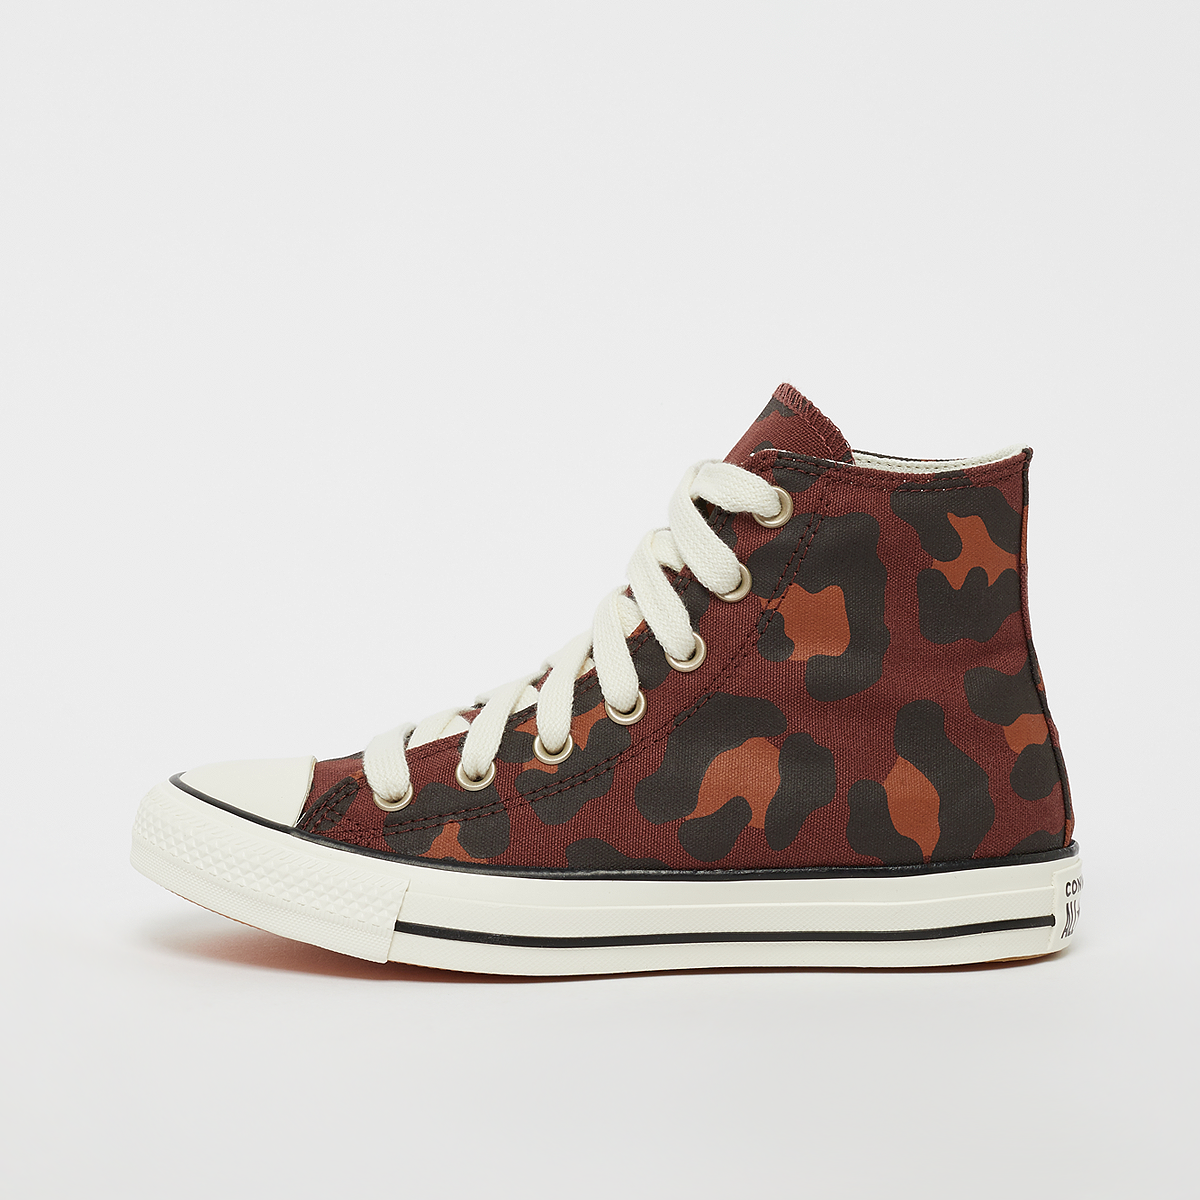 Chuck Taylor All Star, Converse, Footwear, brown/egret/gold, taille: 36.5